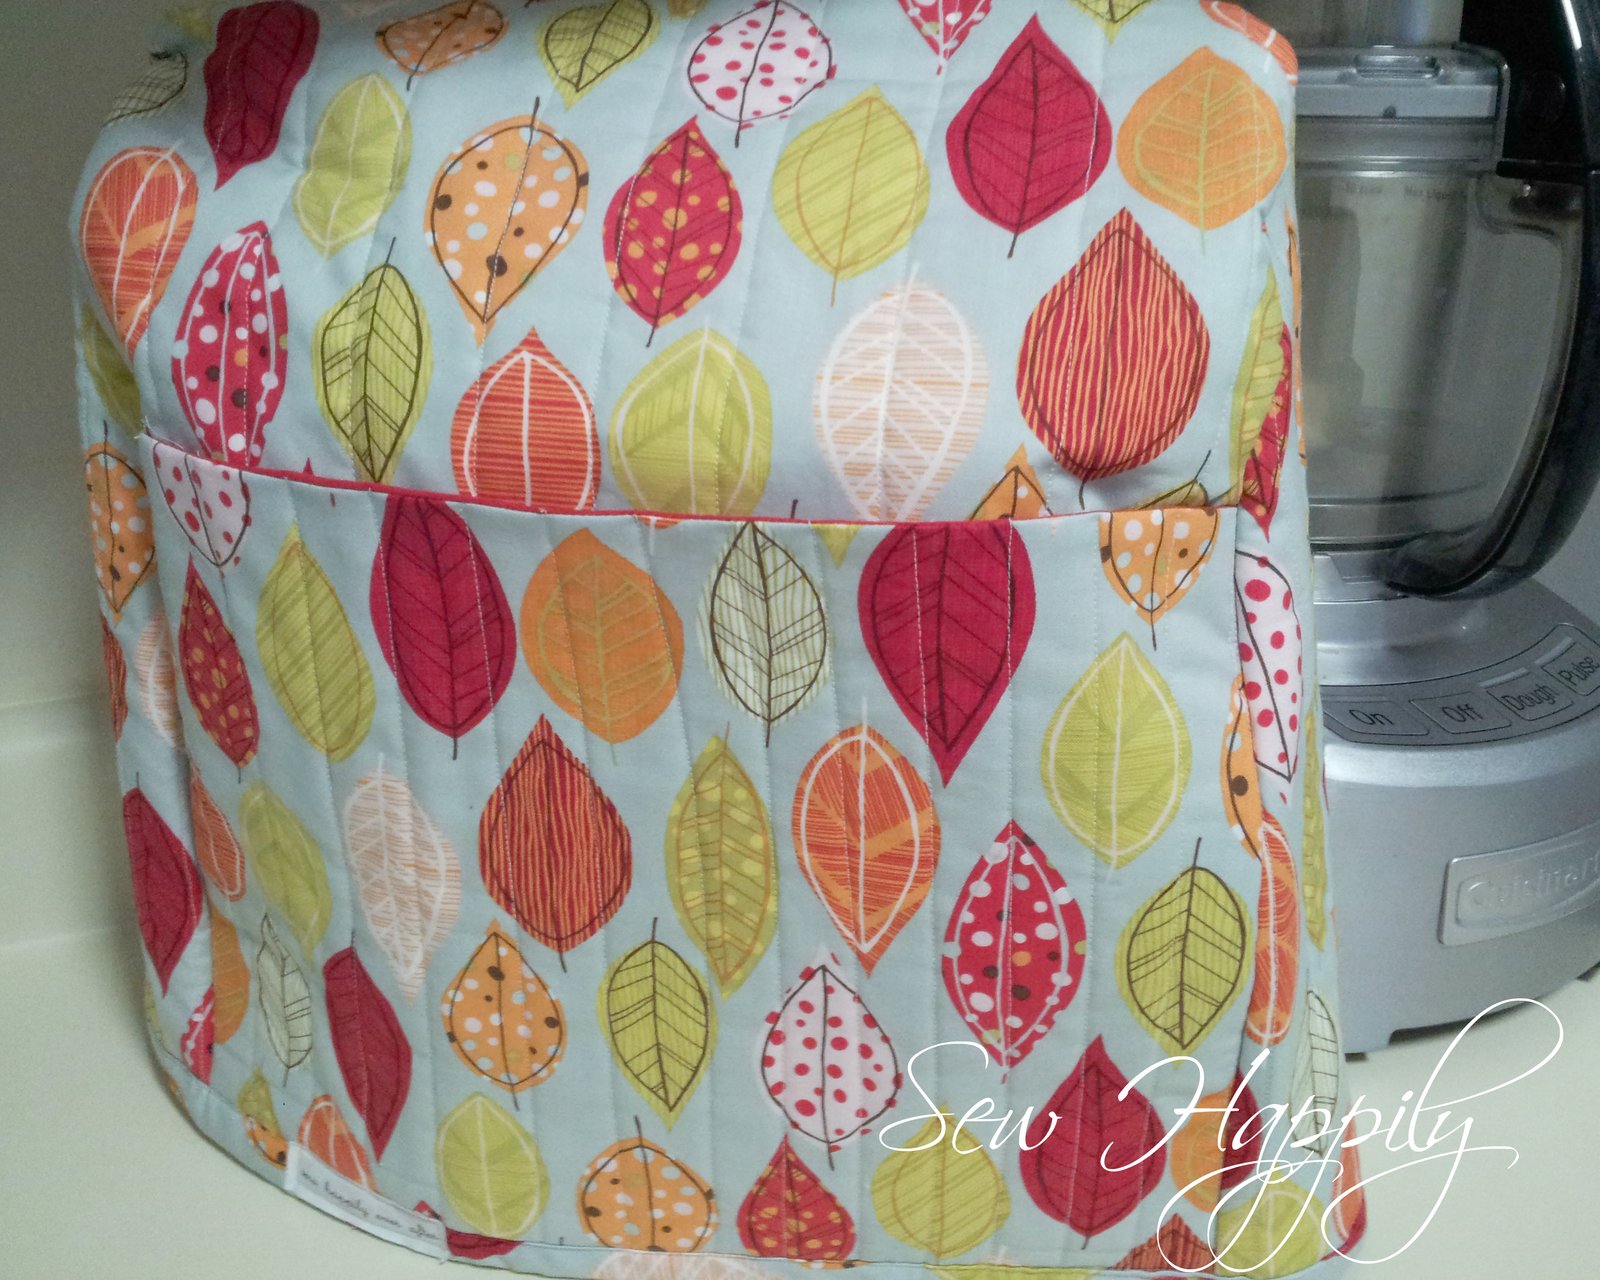 Custom Kitchen Aid Stand Mixer Cover / Sew Happily